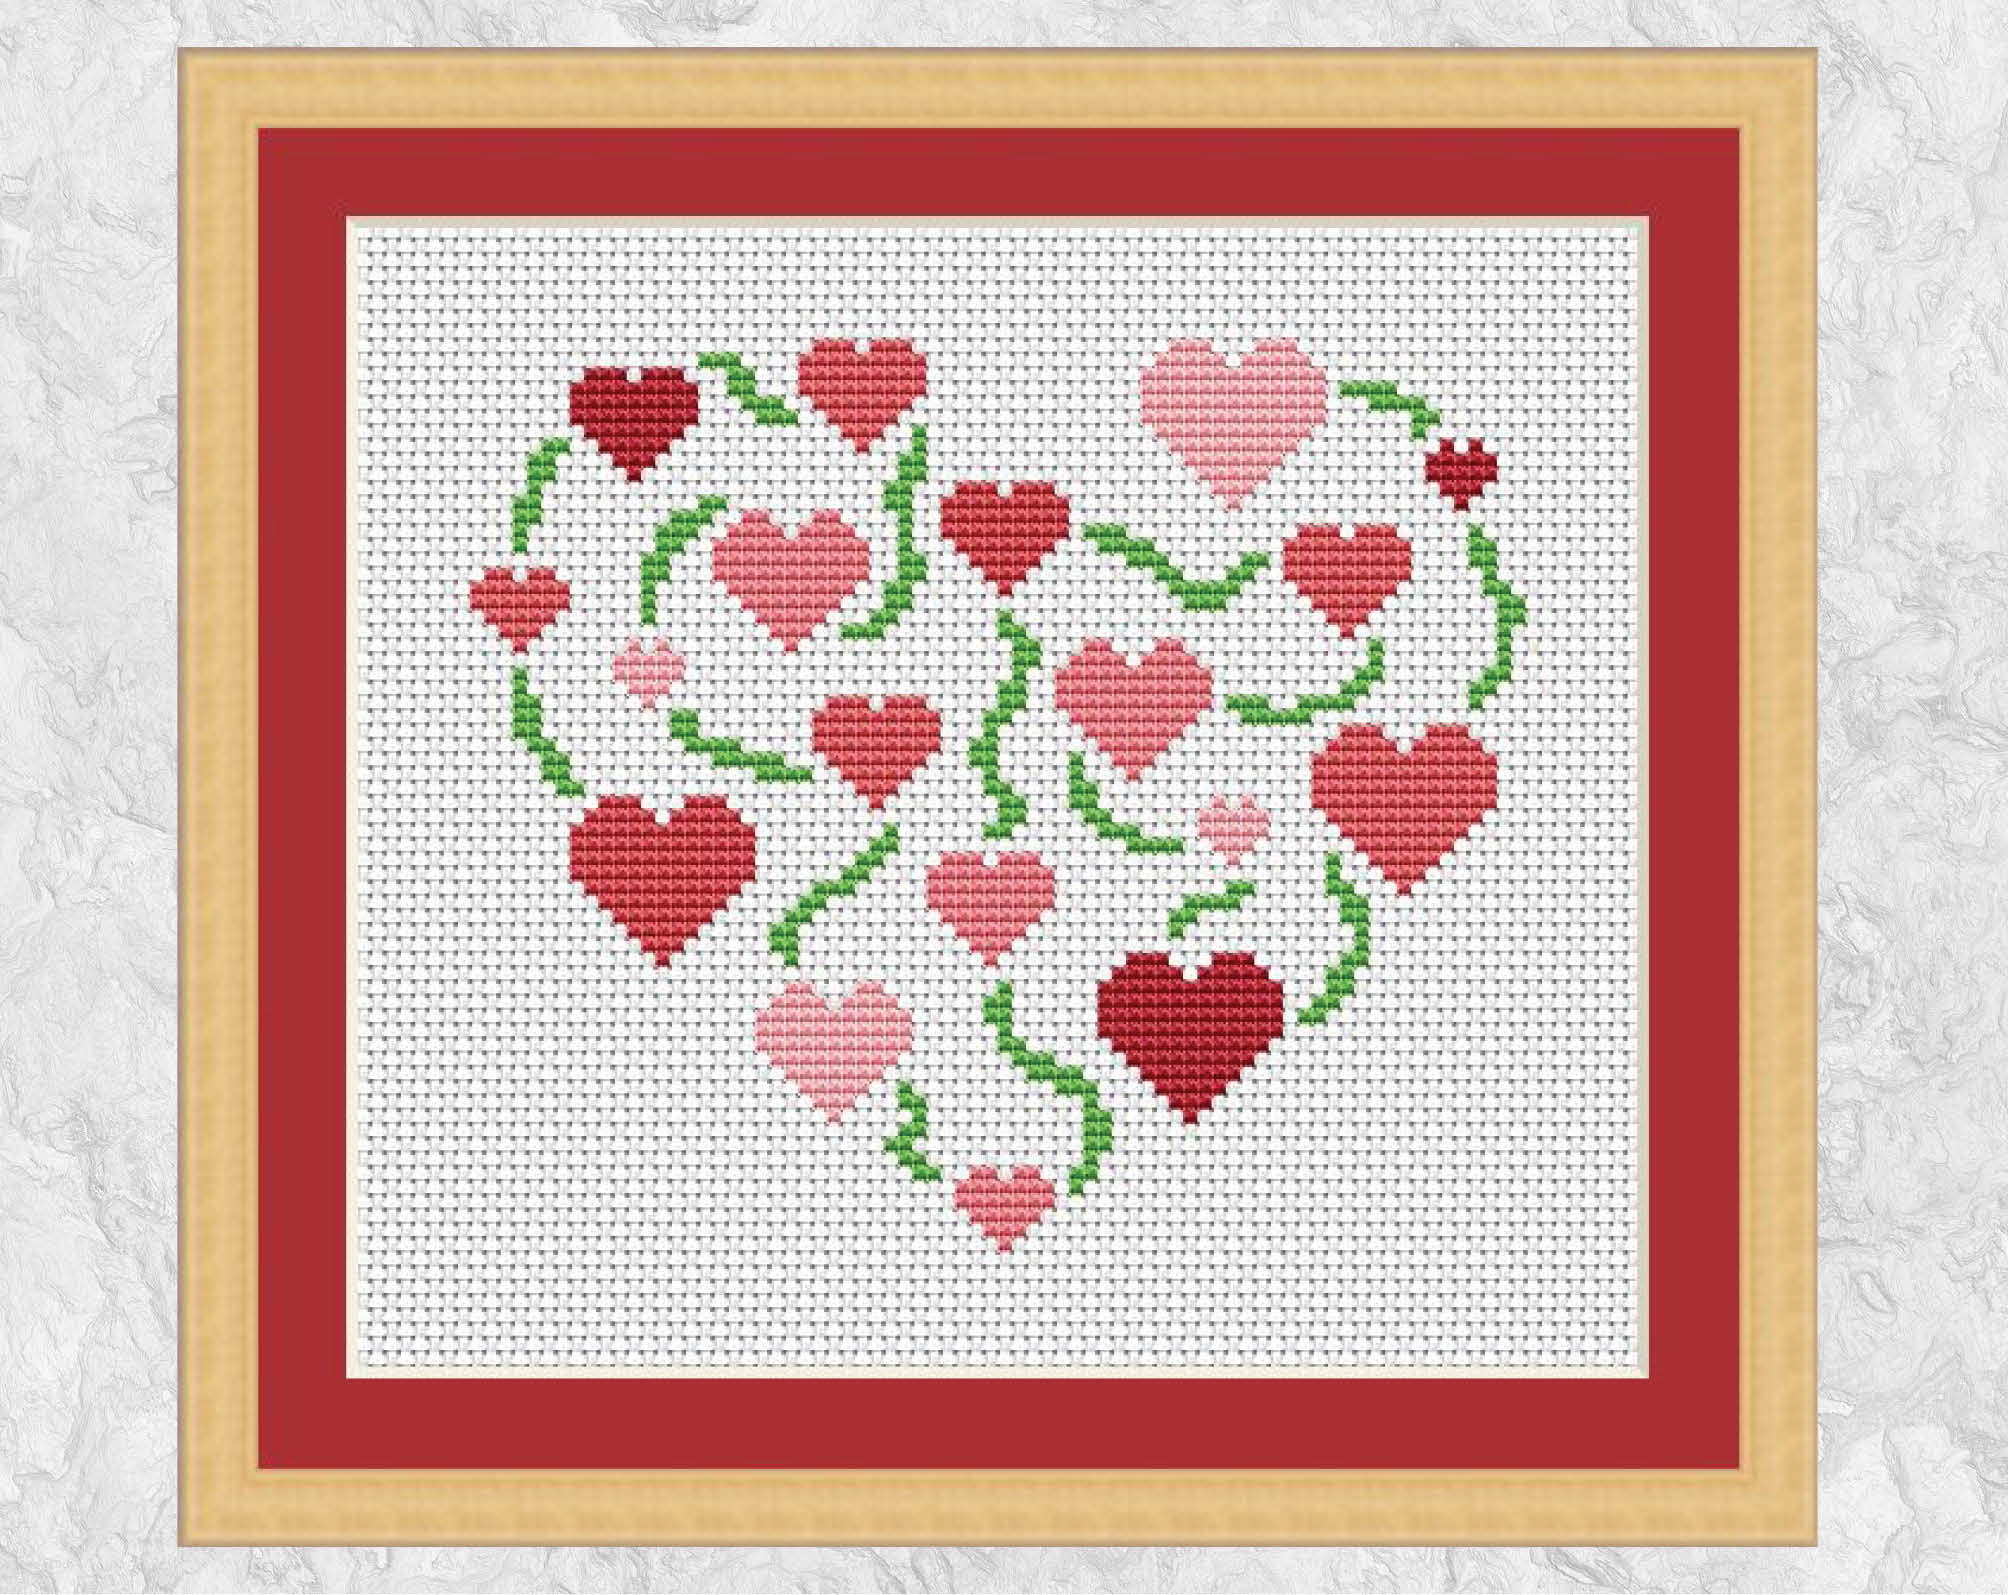 Cross Stitch Embroidery Patterns Pink Hearts Cross Stitch Pattern Easy Modern Embroidery Pattern Simple Quick Design Vine Heart Full Instructions Included Printable Pdf